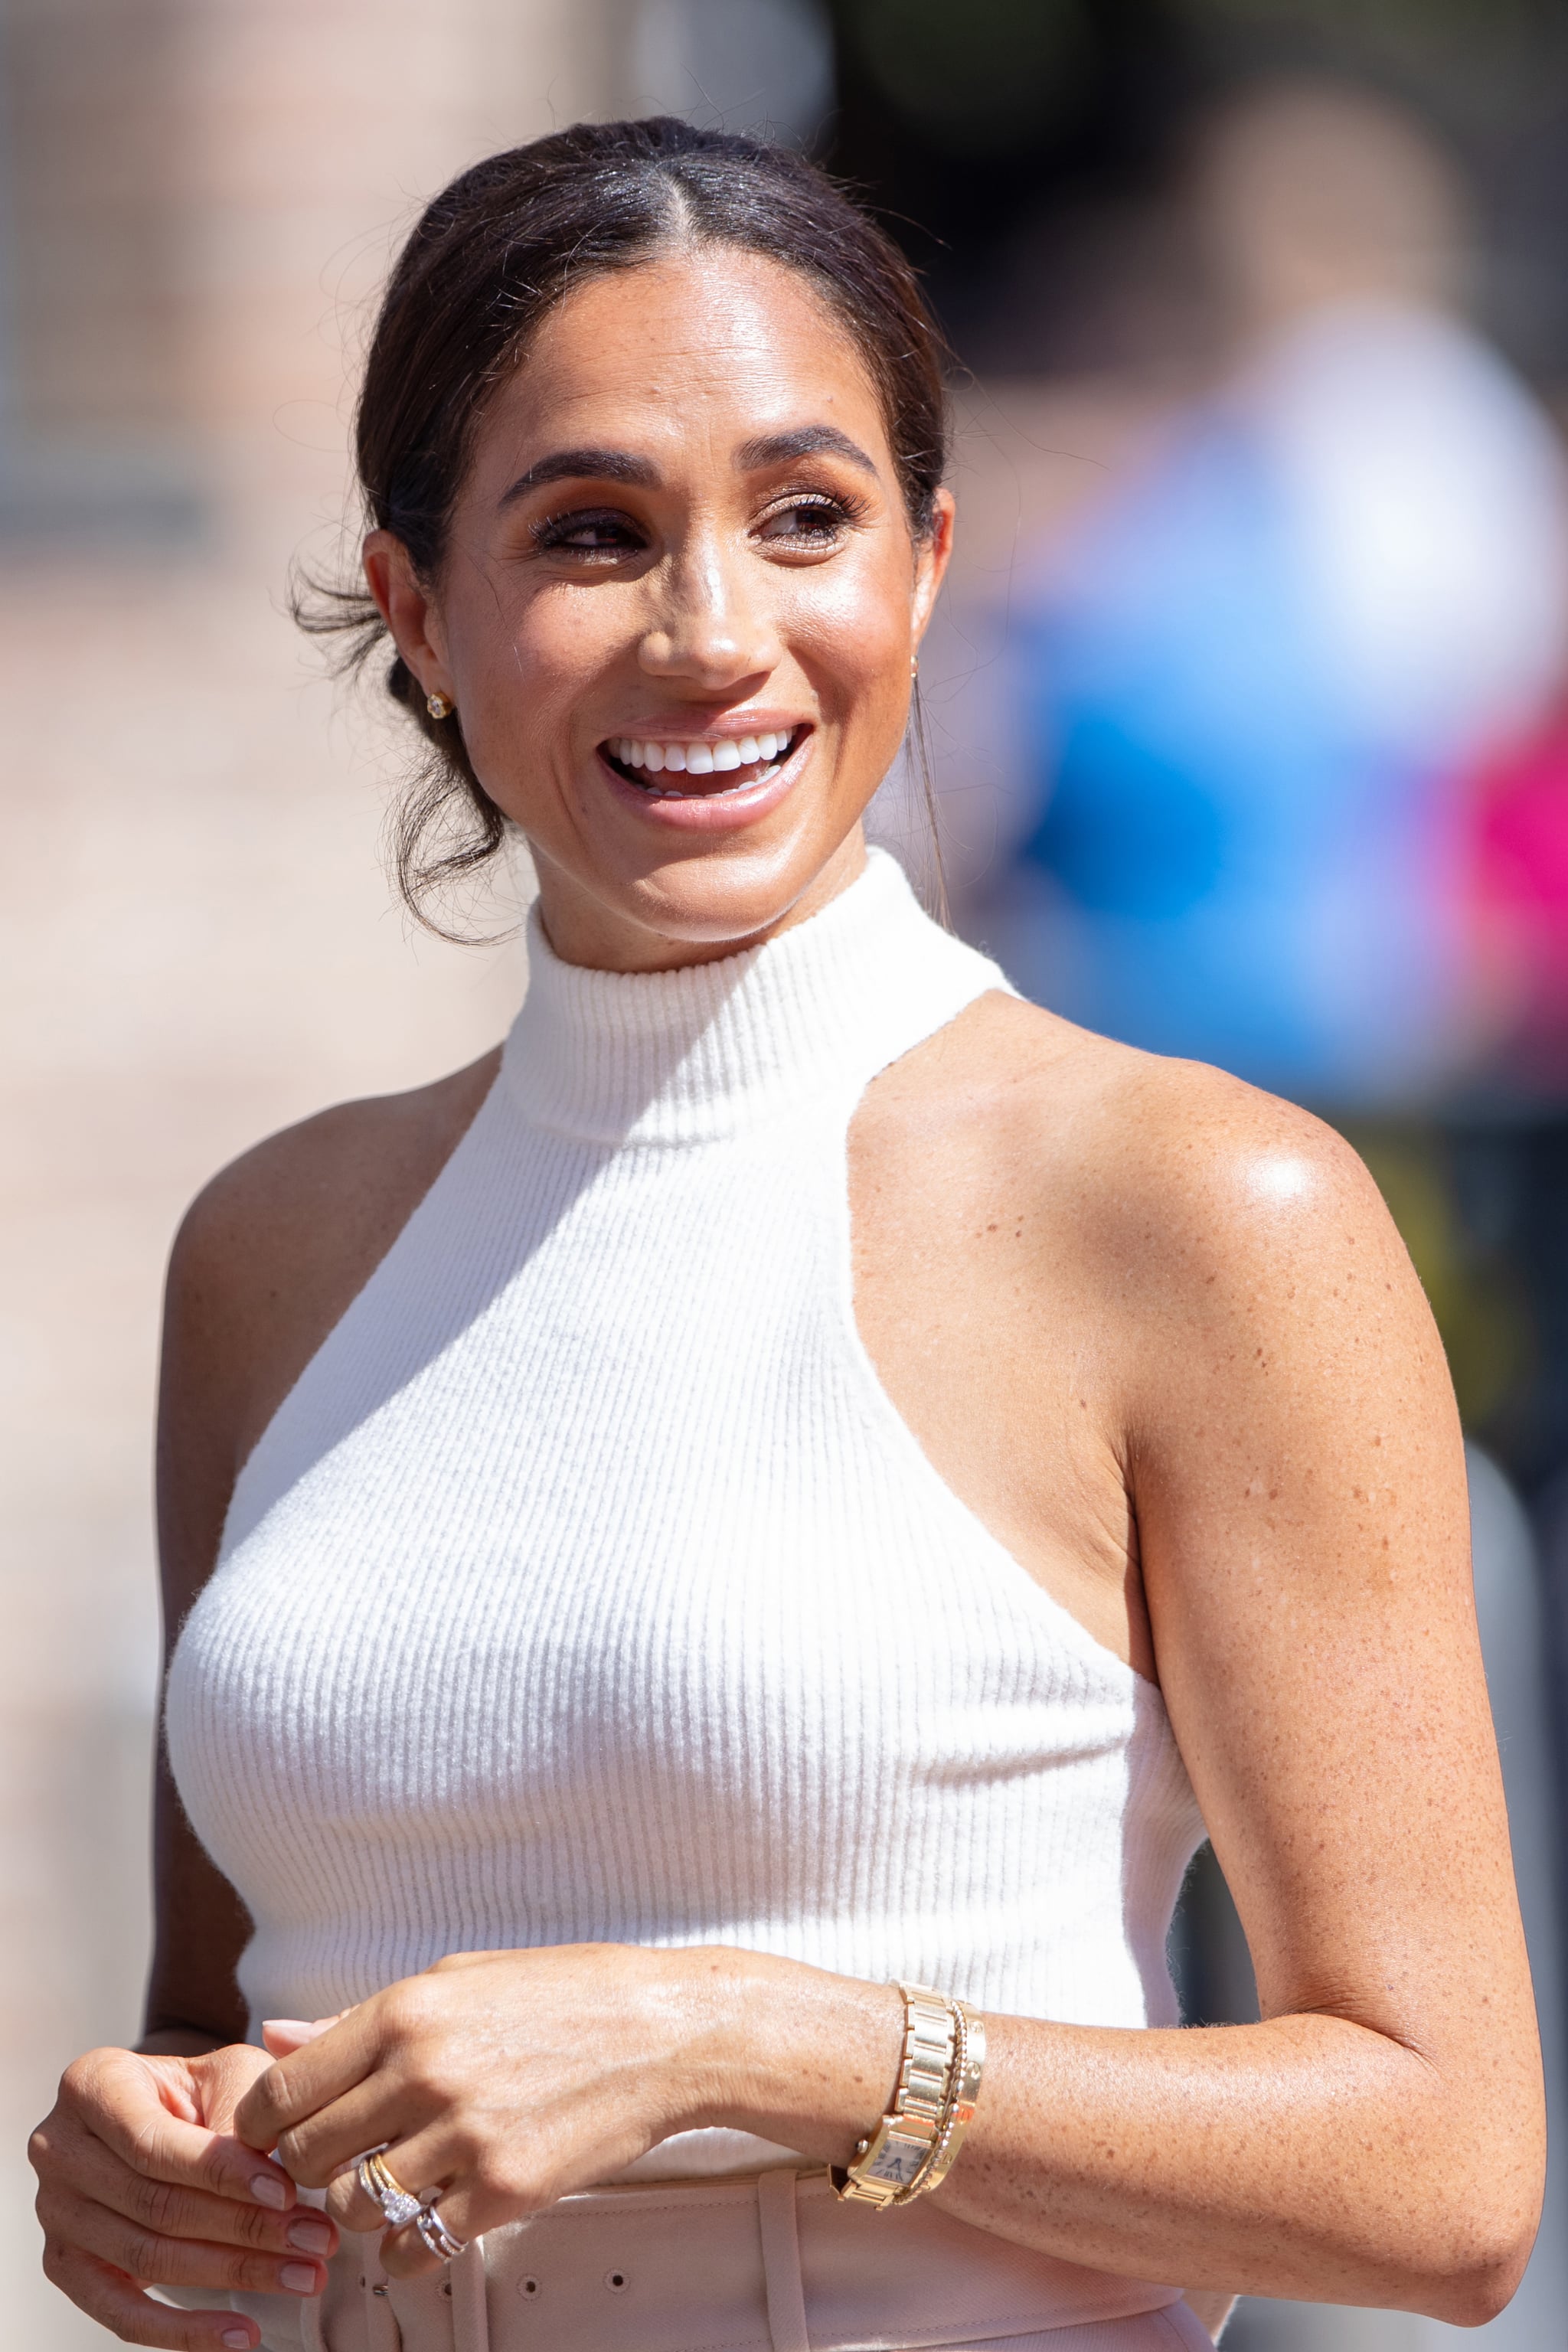 DUSSELDORF, GERMANY - SEPTEMBER 06:  Meghan, Duchess of Sussex arrives at the town hall during the Invictus Games Dusseldorf 2023 - One Year To Go events, on September 06, 2022 in Dusseldorf, Germany. (Photo by Joshua Sammer/Getty Images for Invictus Games Dusseldorf 2023)